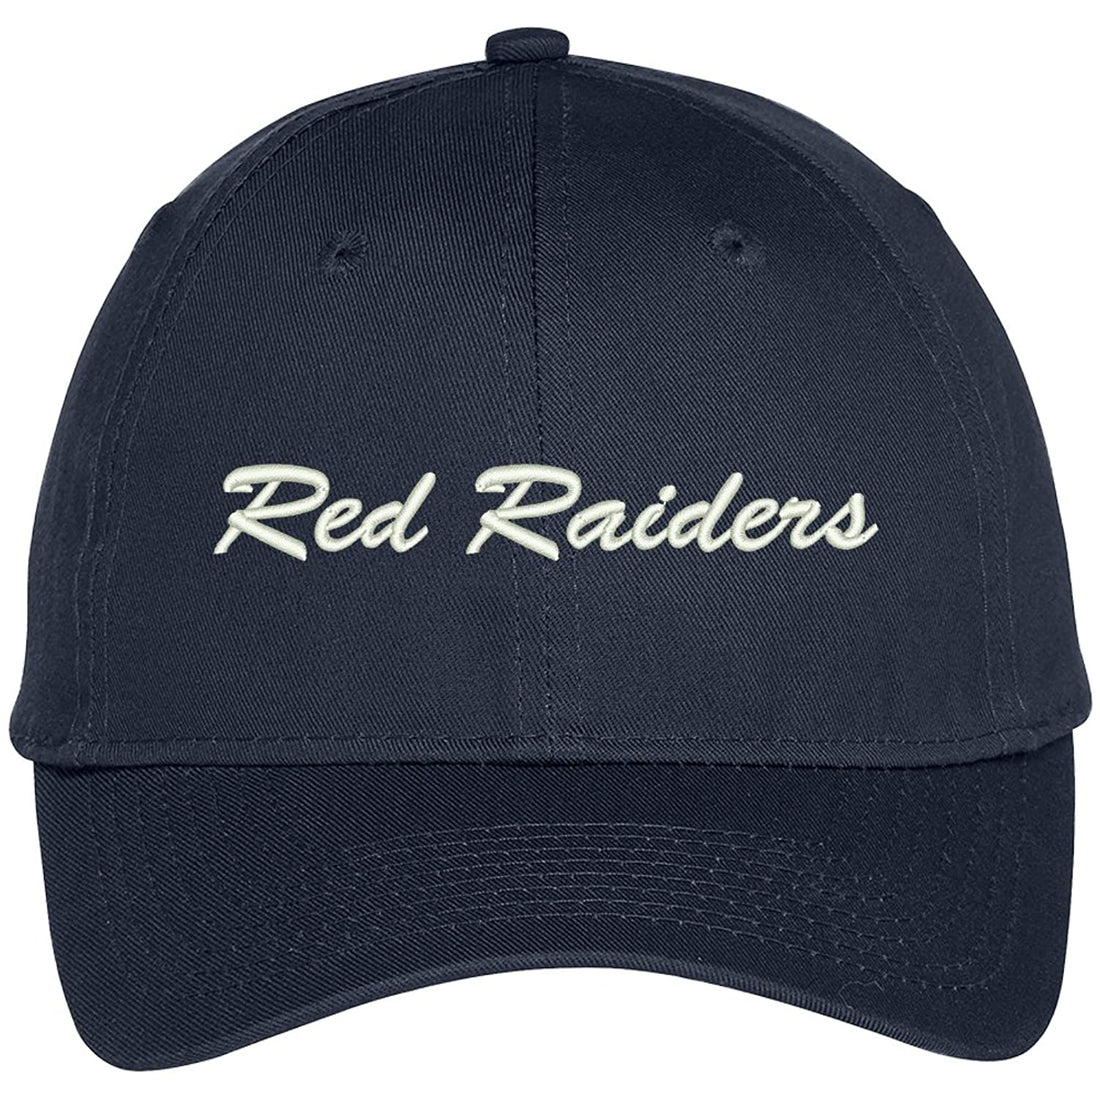 Trendy Apparel Shop Red Raiders Embroidered Team Nickname Mascot Cap - Navy